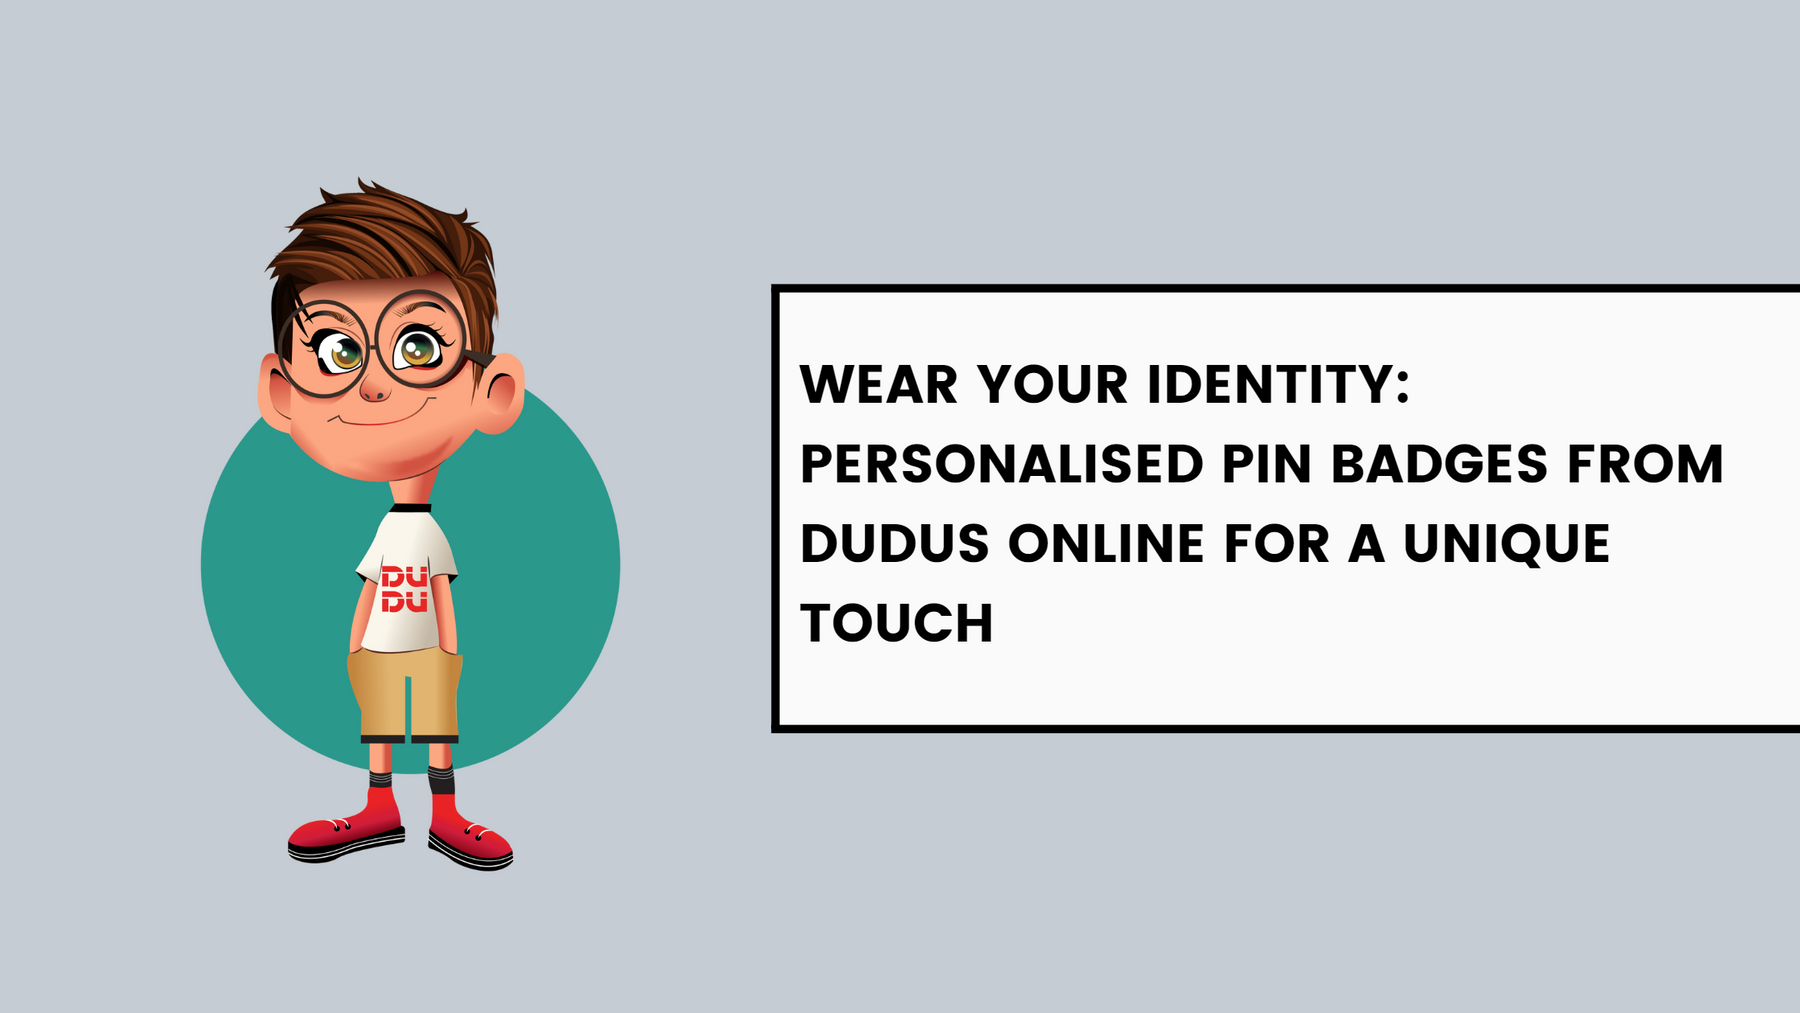 Wear Your Identity: Personalised Pin Badges From Dudus Online For A Unique Touch